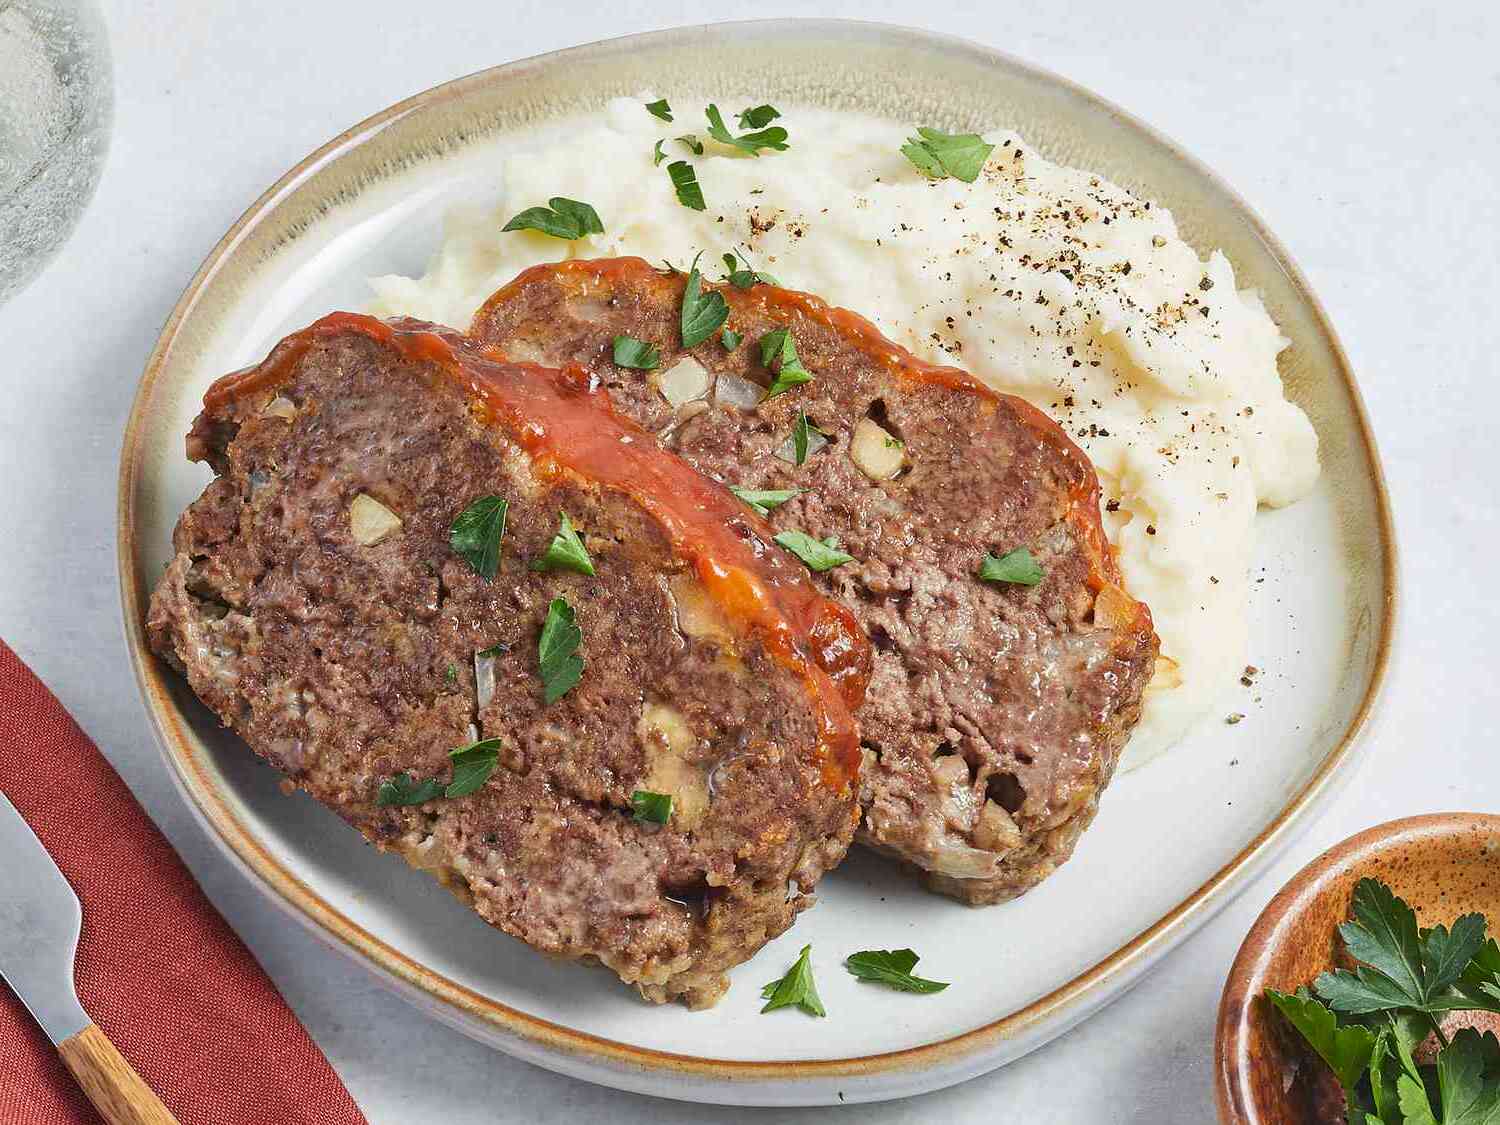 How to Make a Meatloaf in the Mini Instant Pot